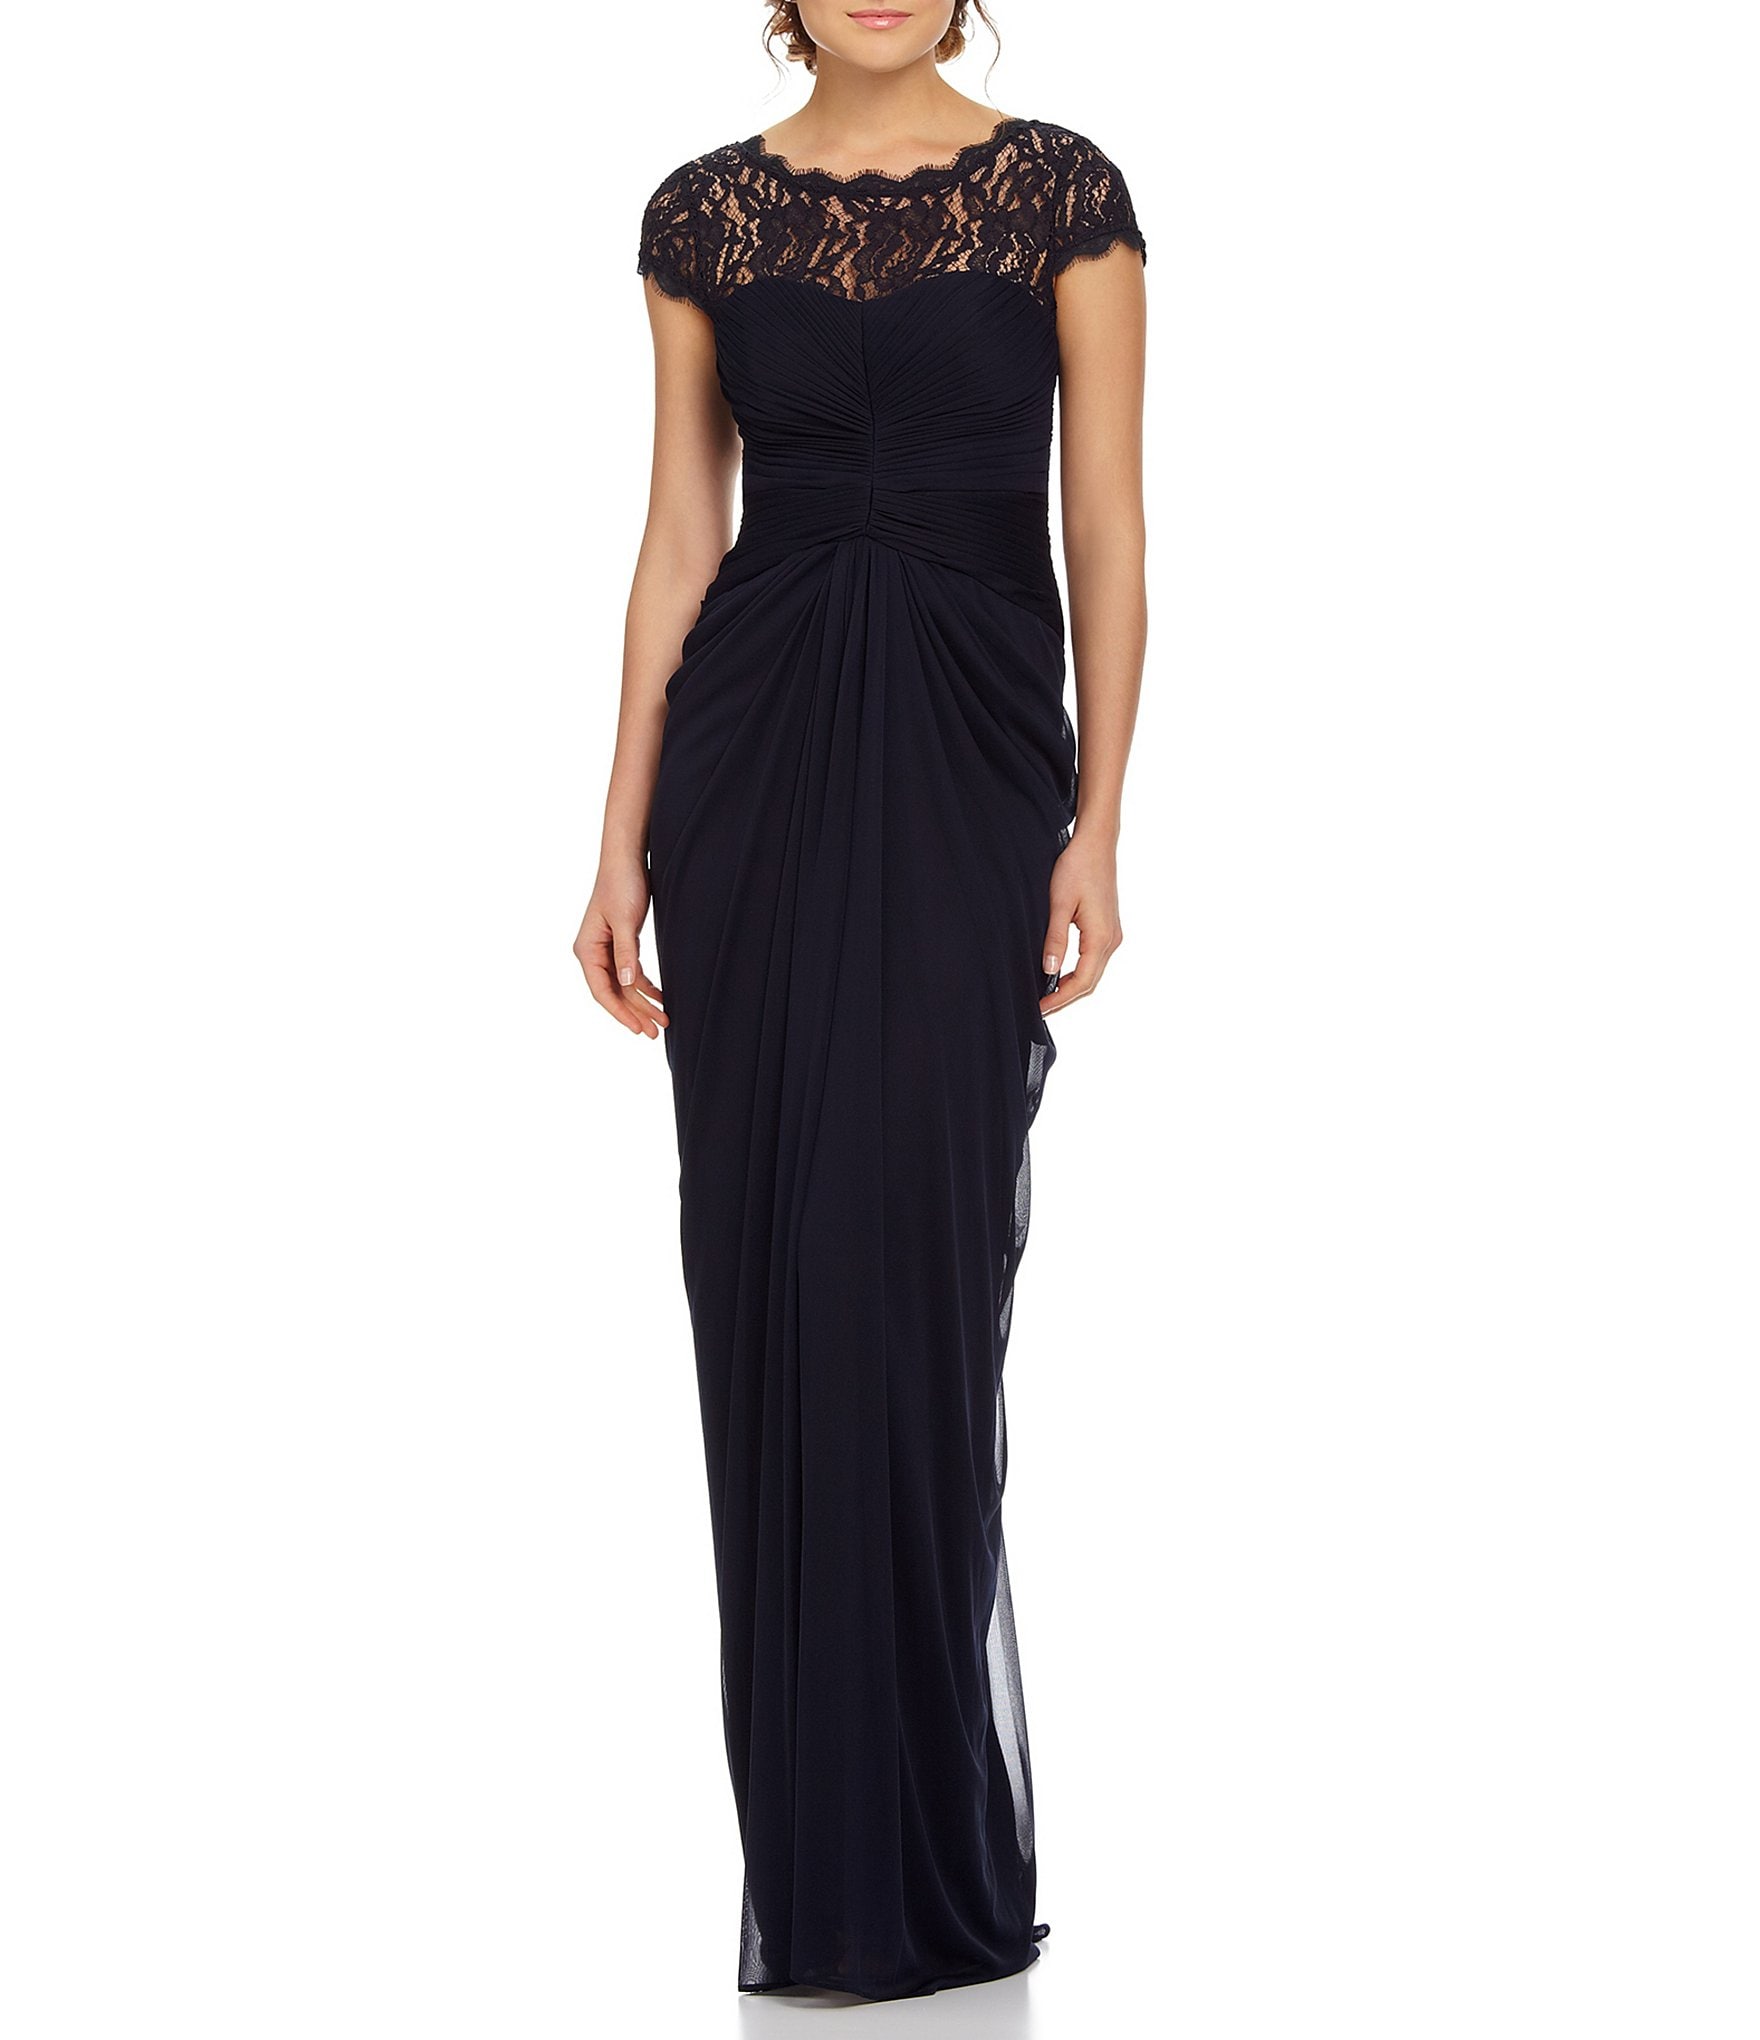 Adrianna Papell Draped Illusion Lace-Neckline Gown | Dillards